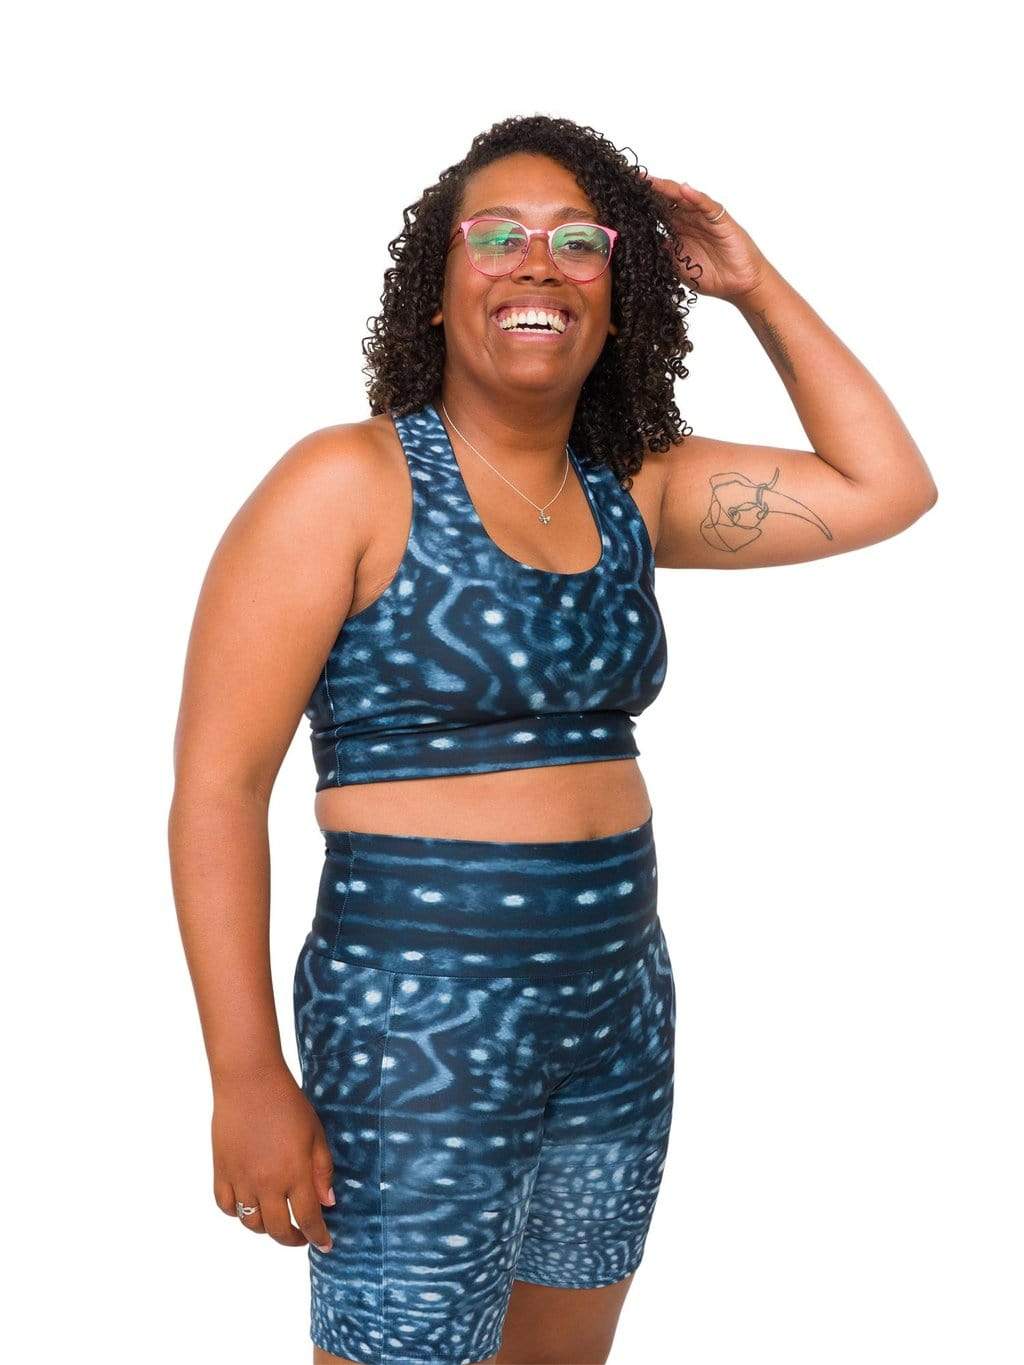 Model: Amani is the CFO of Minorities in Shark Sciences and a shark scientist. She is 5&#39;3&quot;, 160 lbs, 36C and is wearing a M legging and L top.